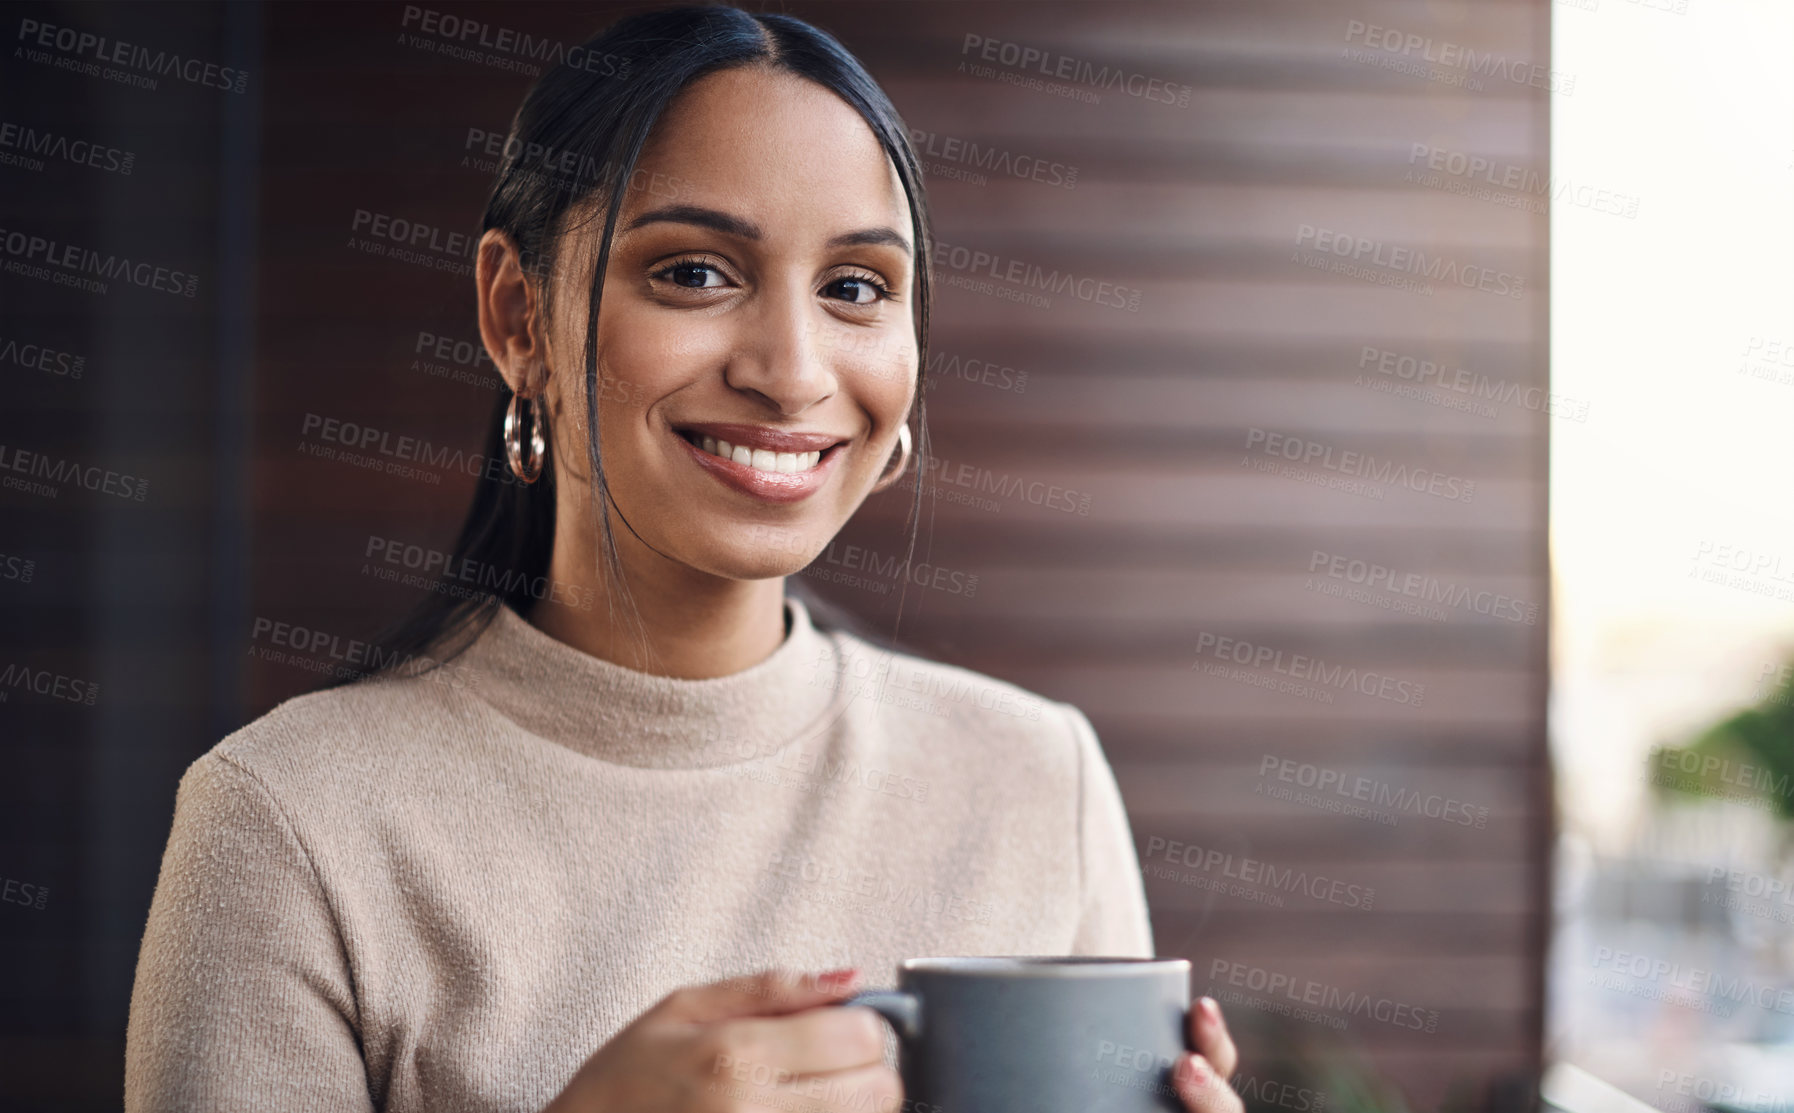 Buy stock photo Cropped portrait of an attractive young businesswoman drinking her coffee while working in the office